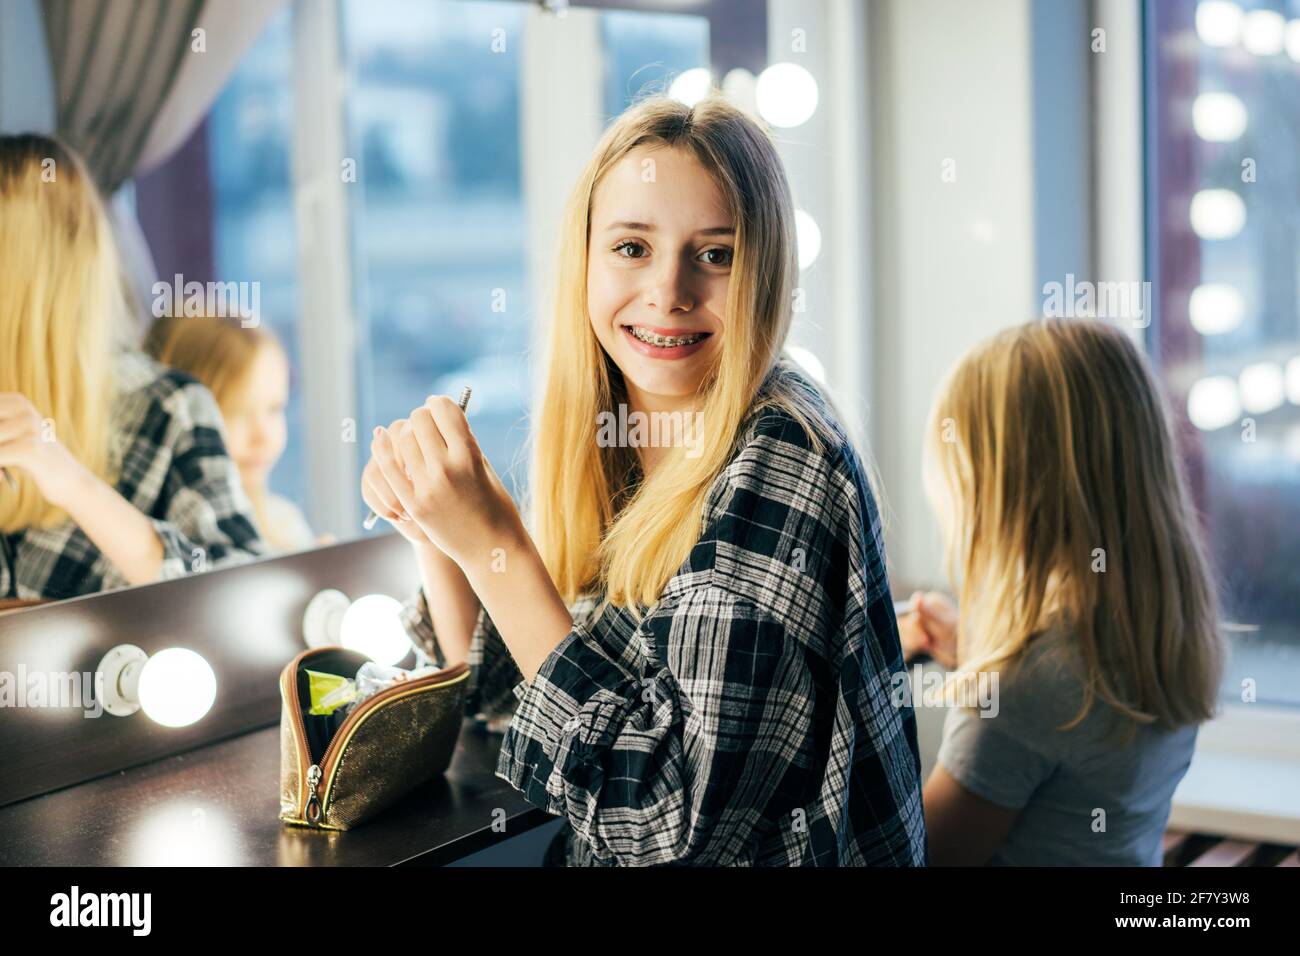 Life of a teenager, a girl with braces on her teeth smiles looking into the camera. Blonde girl in a shirt posing in front of the mirror in the dressi Stock Photo